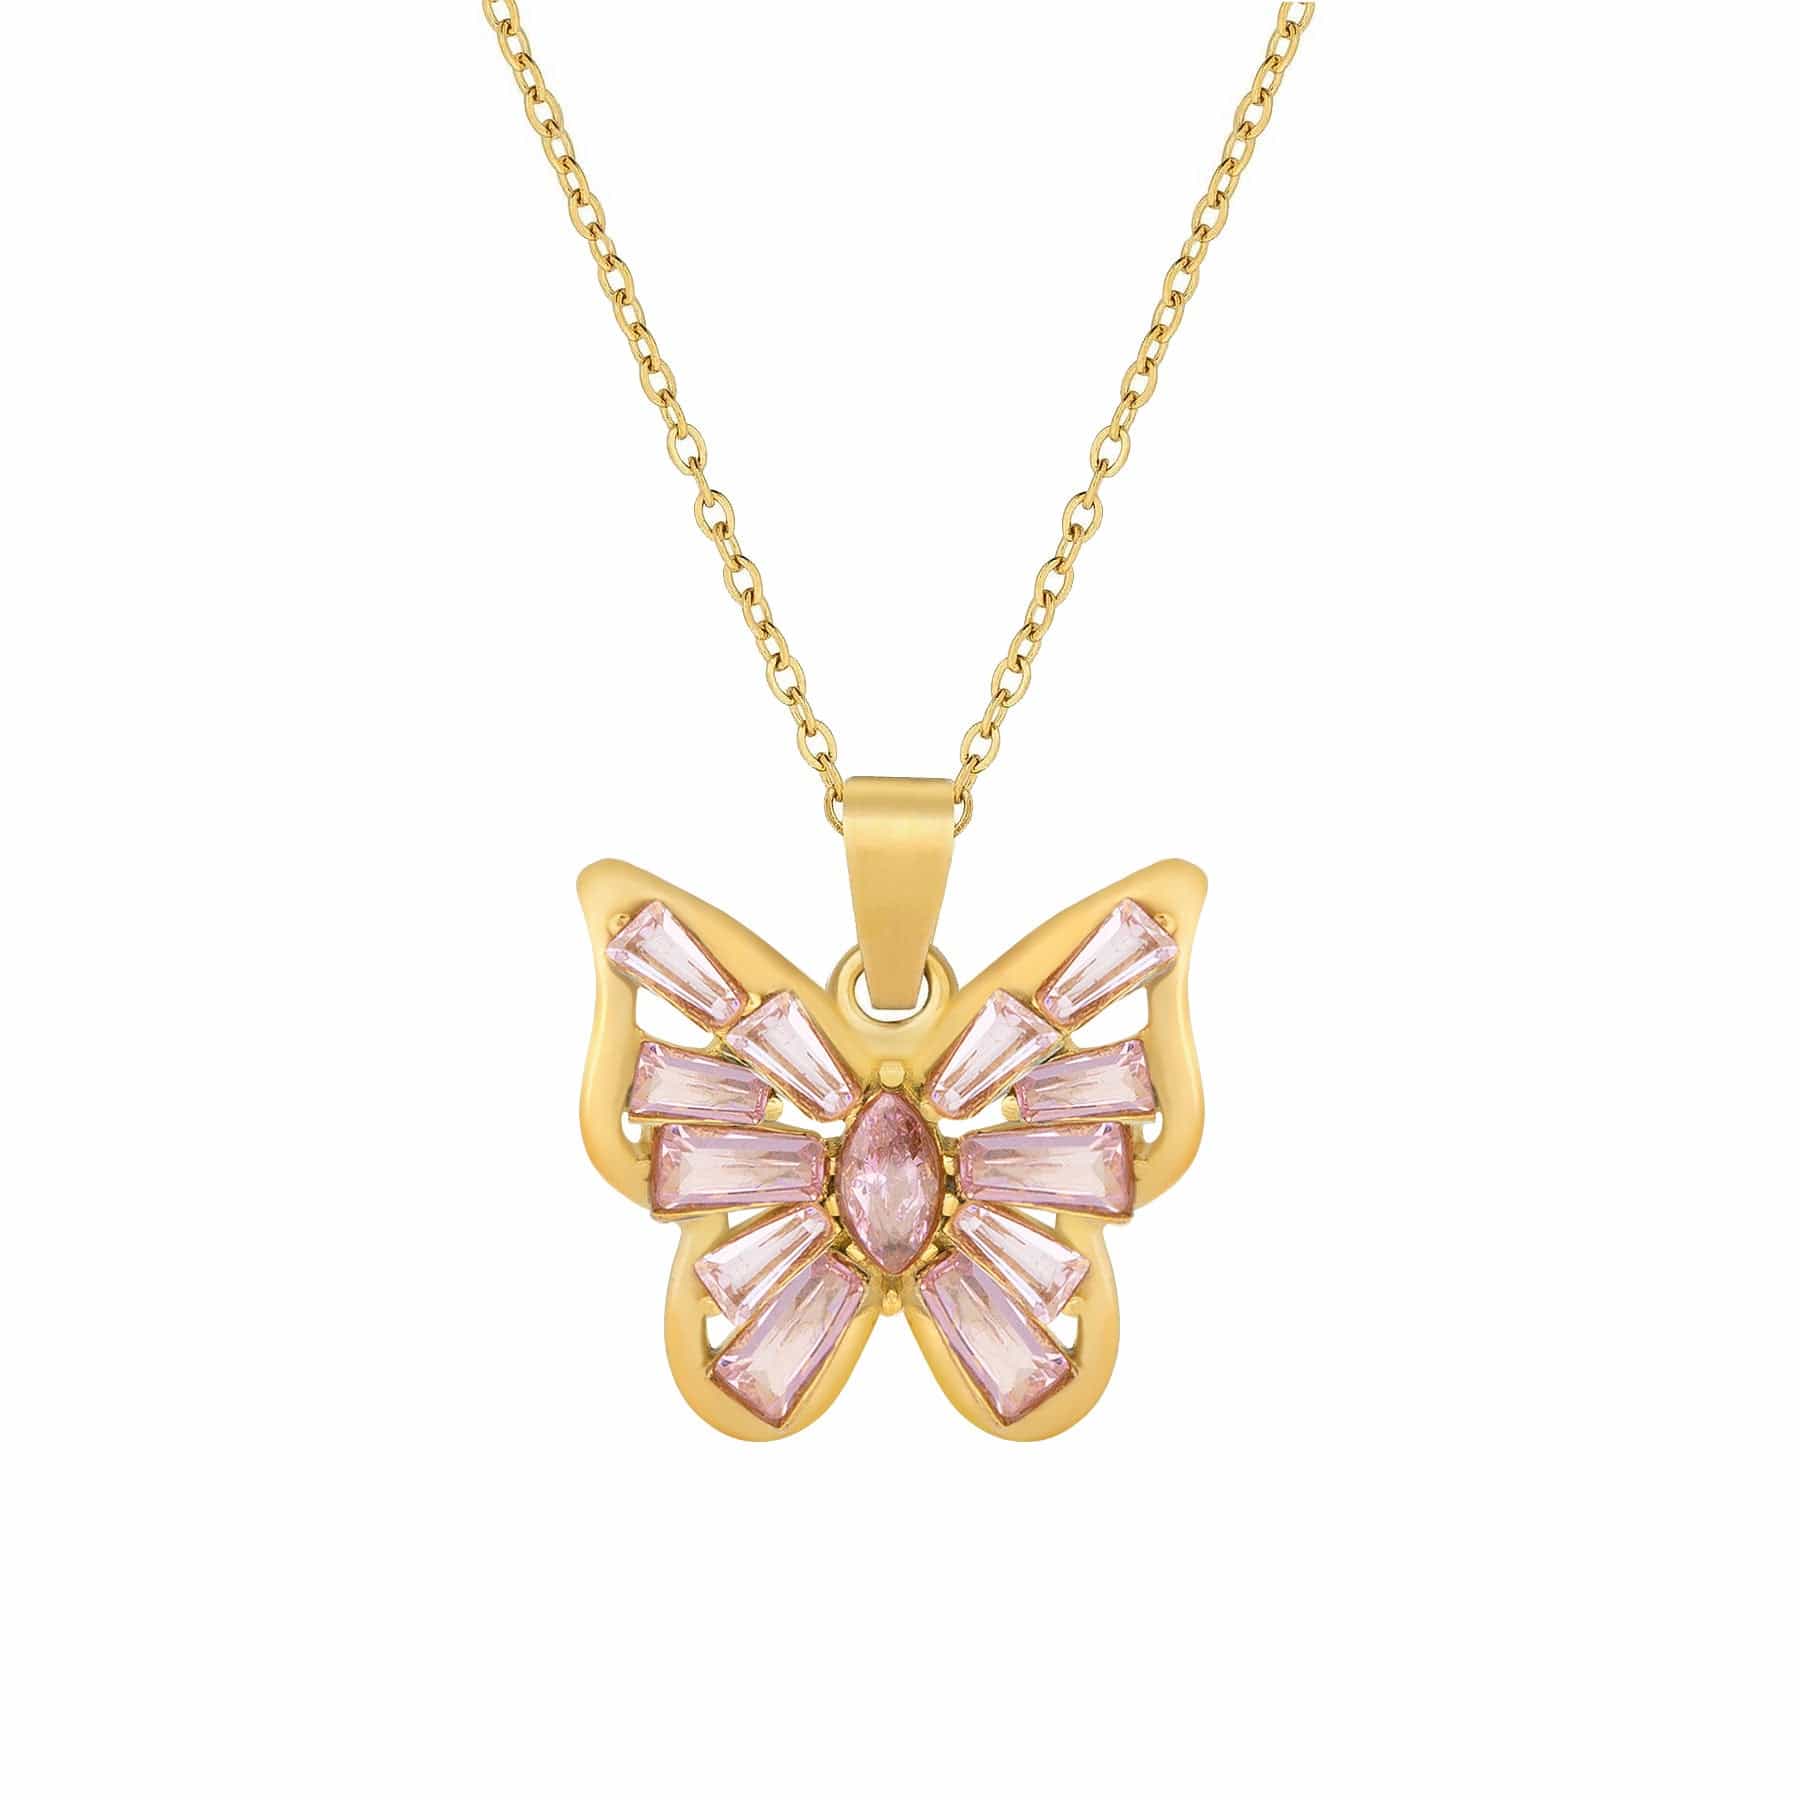 BohoMoon Stainless Steel Alexandria Butterfly Necklace Gold / Pink